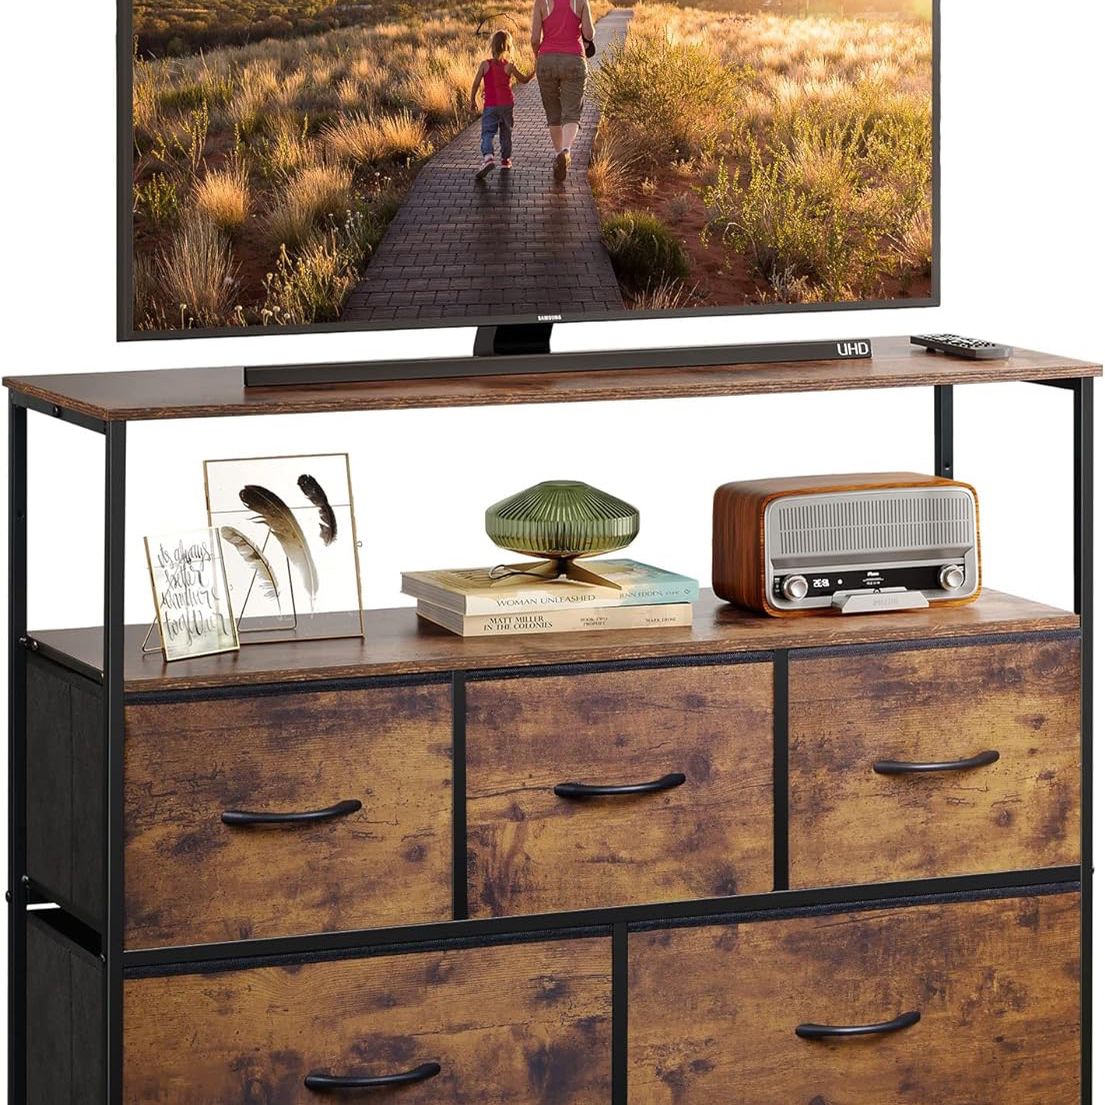 WLIVE Dresser TV Stand, Entertainment Center with Fabric Chest of Drawers for Bedroom, Media Console Table with Metal Frame and Wood Top for TV up to 